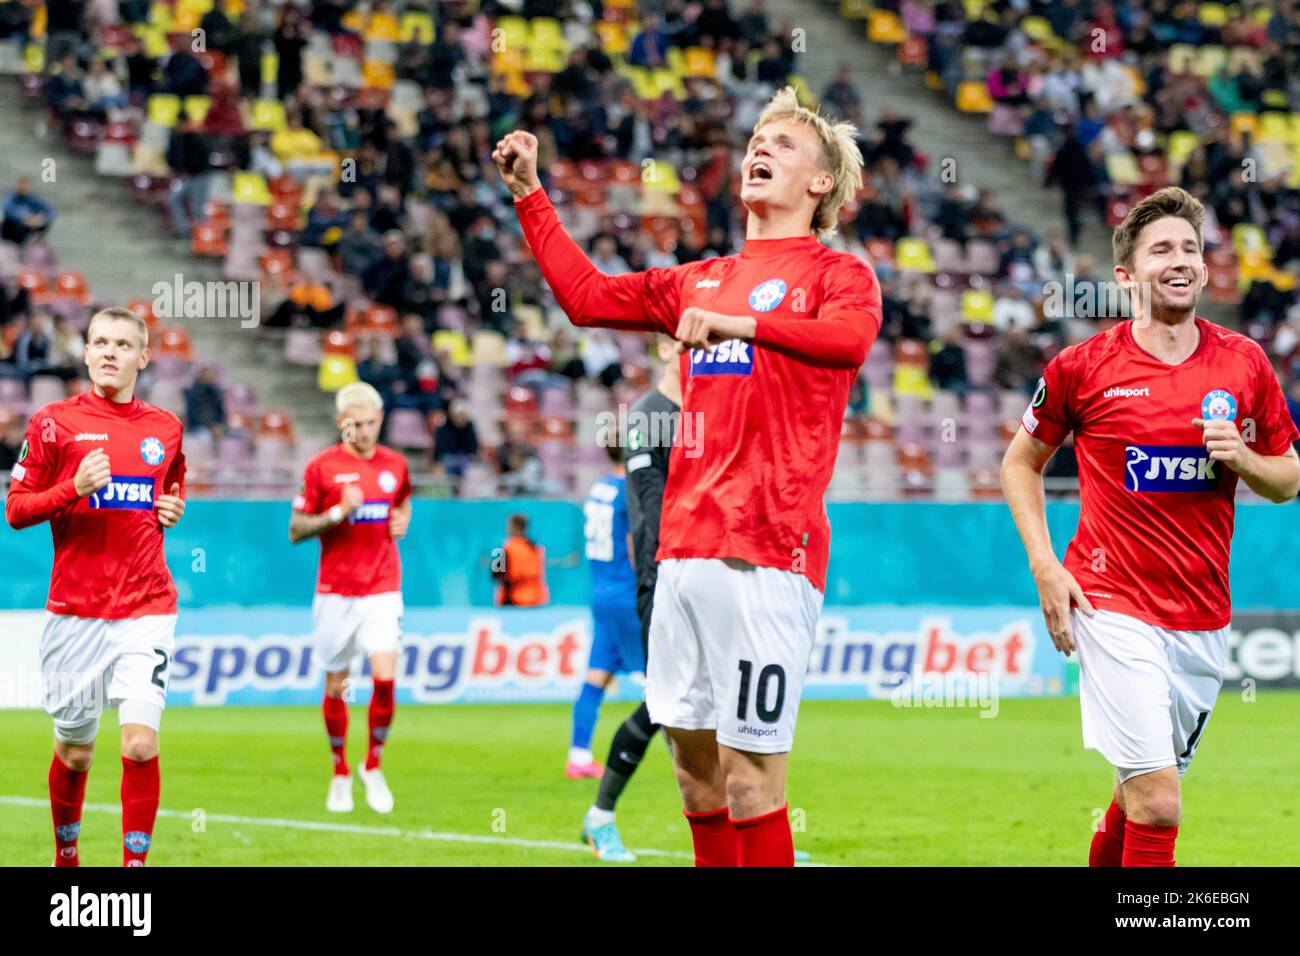 Bucharest, Romania. 14th Oct, 2022. October 14, 2022: Soren Tengstedt #10 of Silkeborg IF celebrating the 4th goal during of the UEFA Europa Conference League group B match between FCSB Bucharest and Silkeborg IF at National Arena Stadium in Bucharest, Romania ROU. Catalin Soare/Cronos Credit: Cronos/Alamy Live News Stock Photo